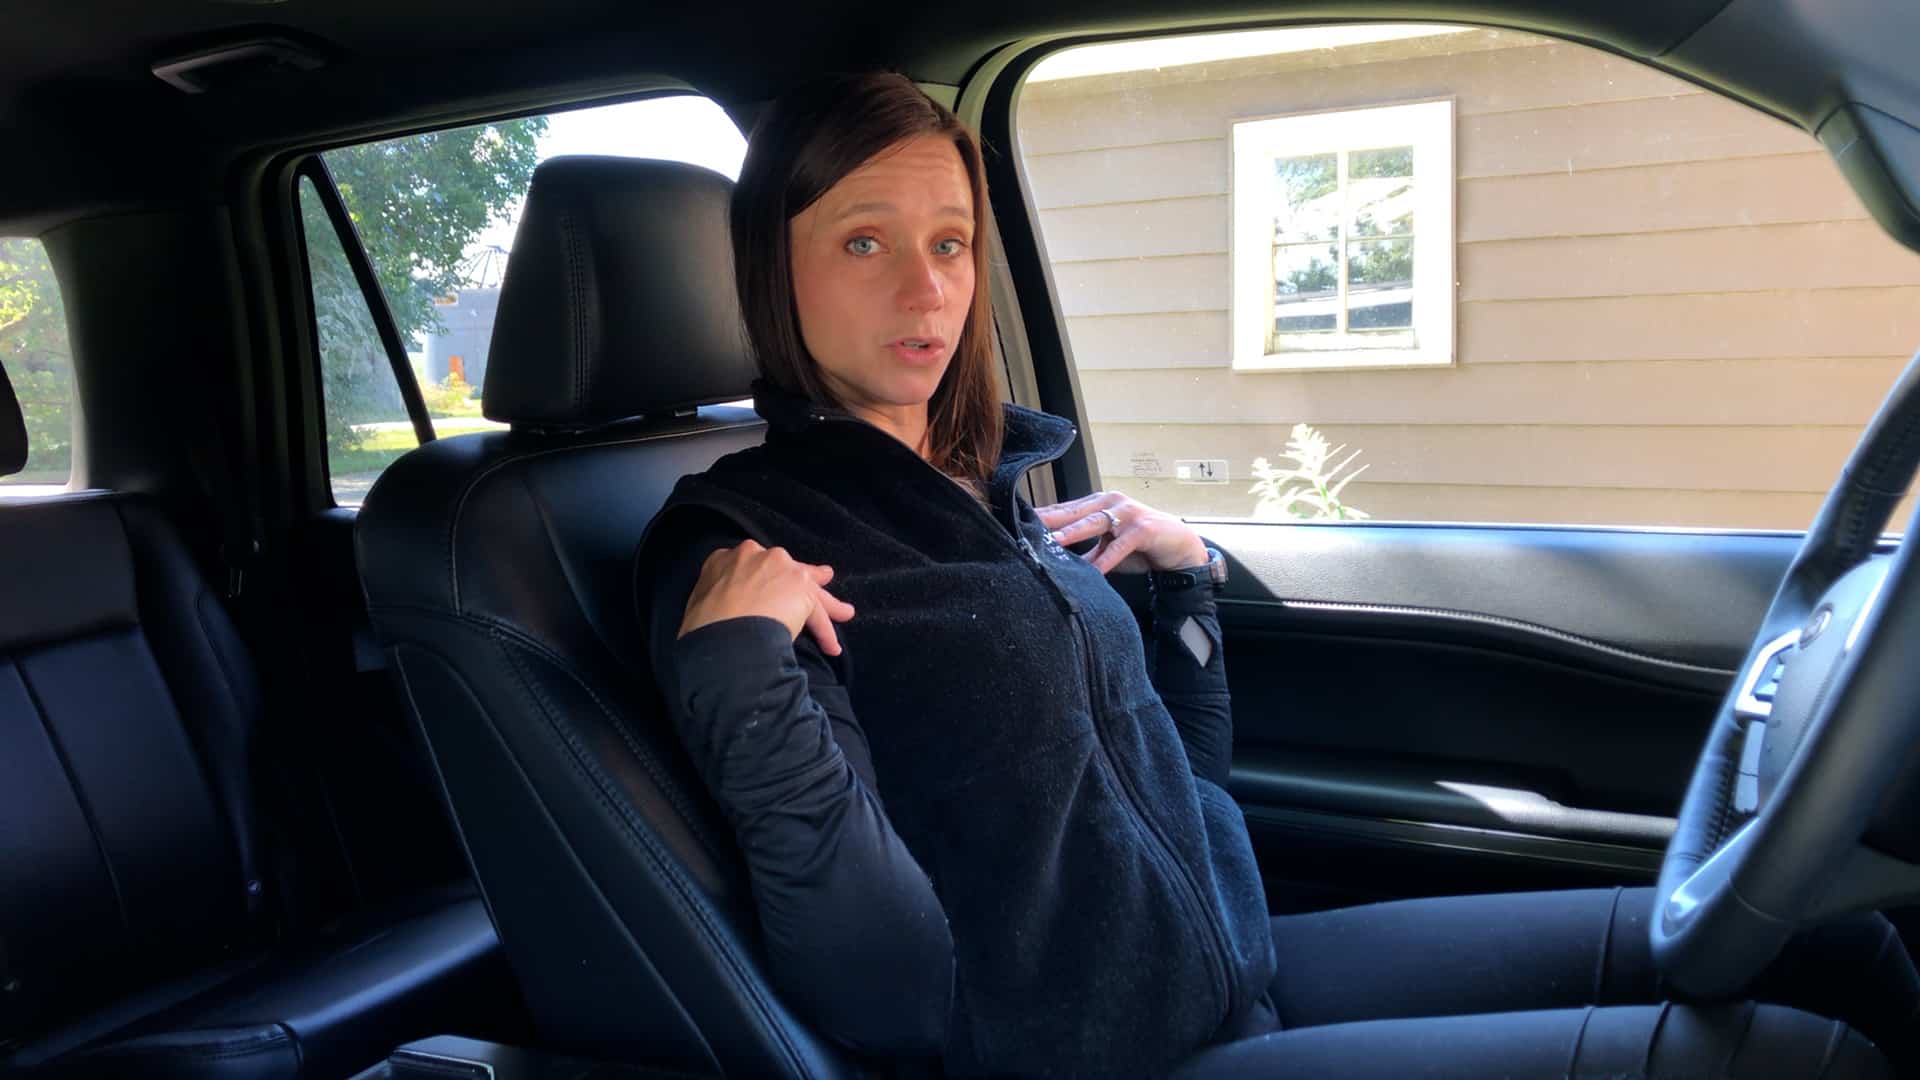 Physical therapist demonstrated should blade squeezes from her car